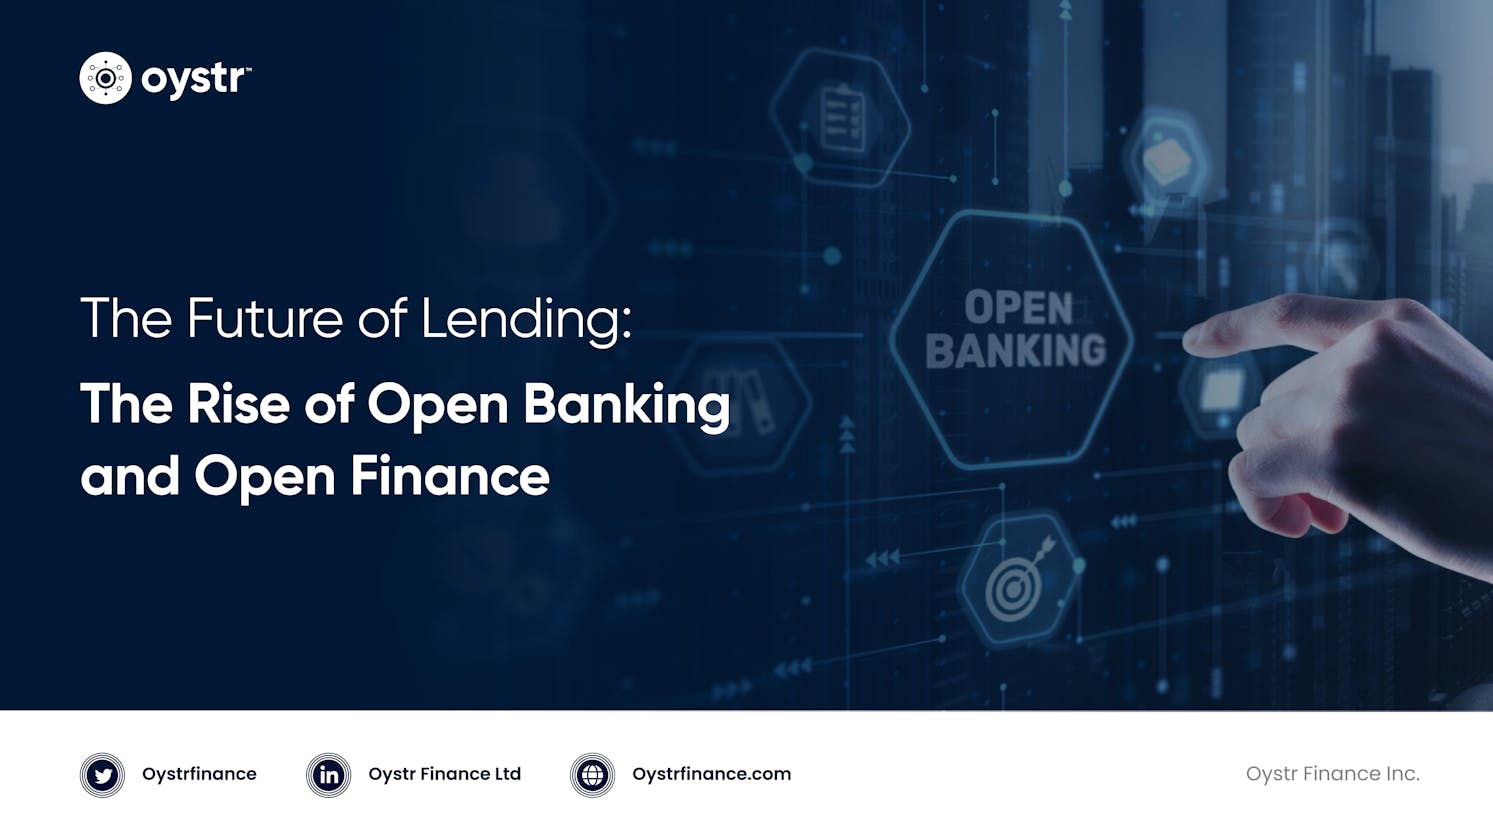 The Rise of Open Banking and Open Finance